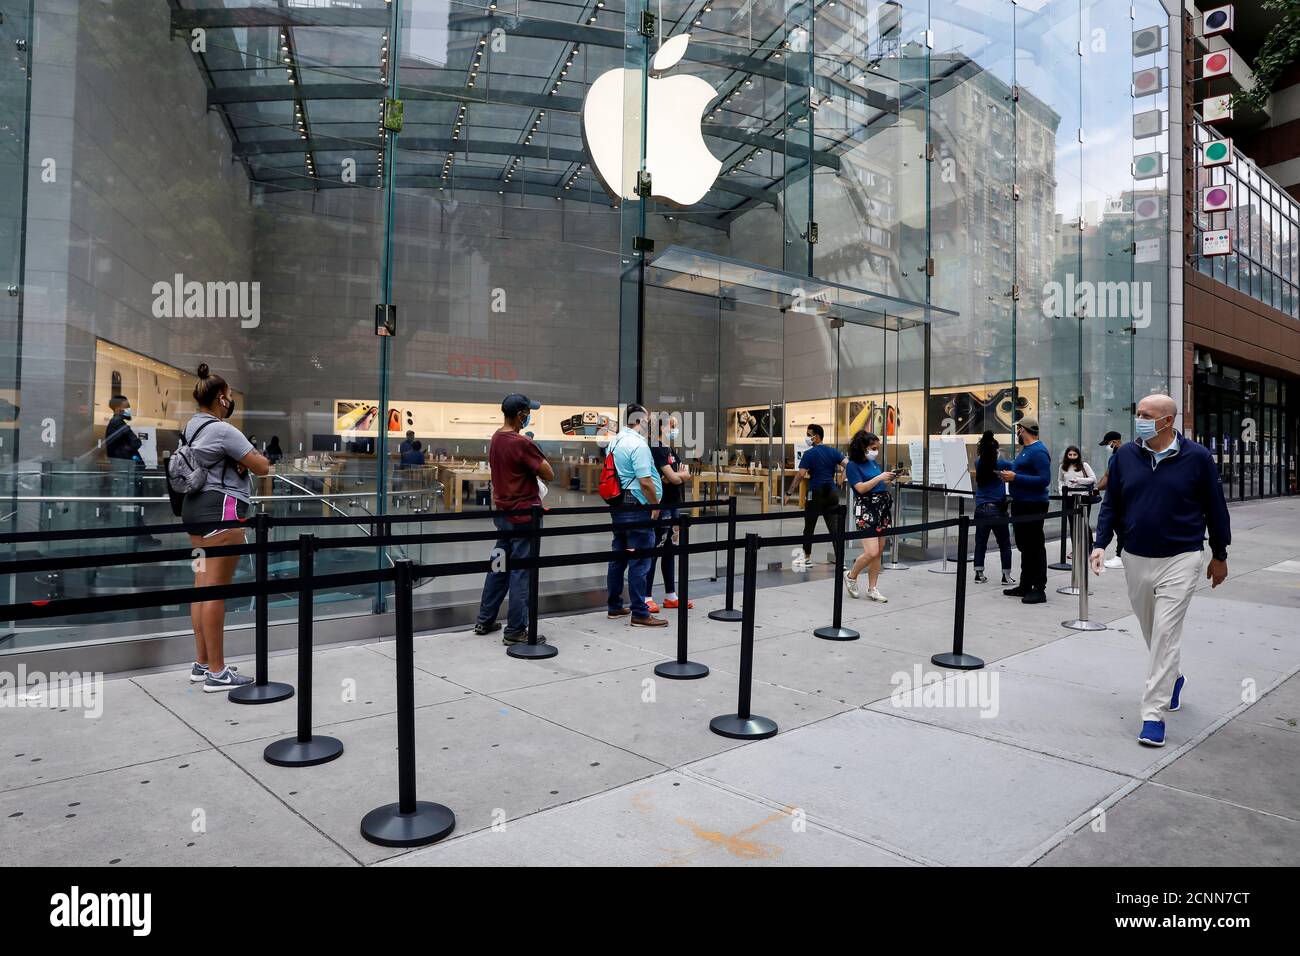 Customers distance before entering an Apple Store during phase one of reopening after the COVID-19 lockdown in New York City, New York, U.S. June 17, 2020. REUTERS/Brendan McDermid Stock Photo